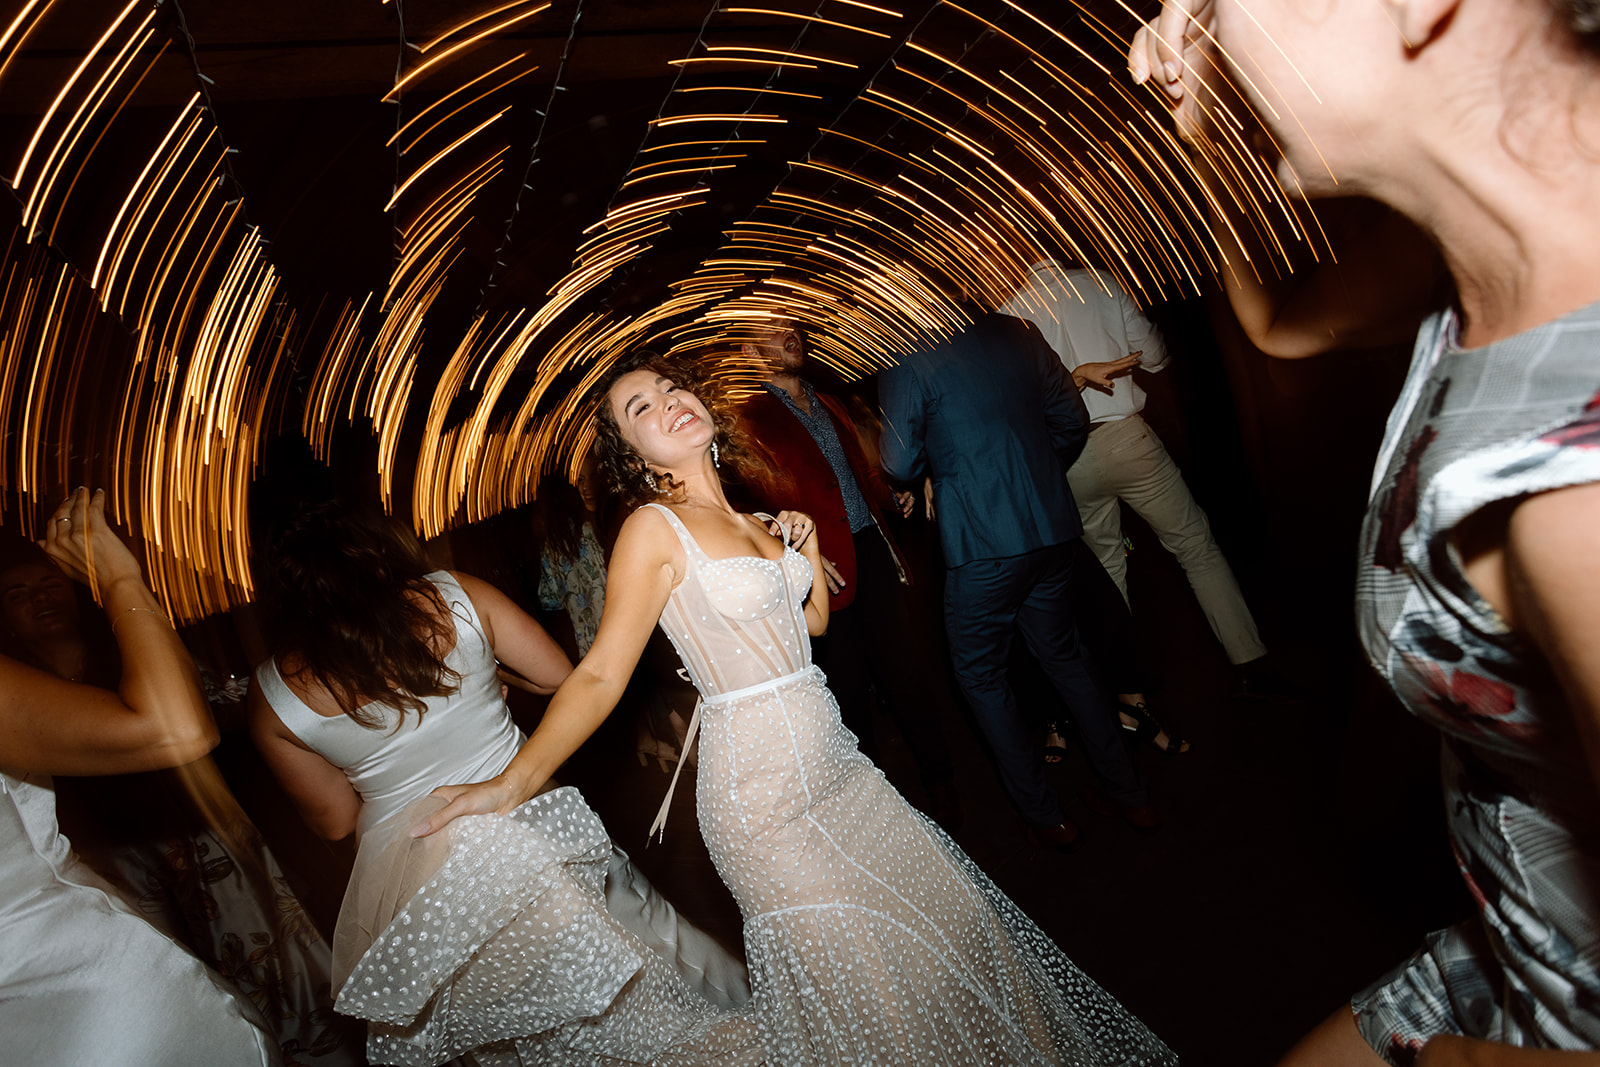 After party dance at the wedding in the Southern Highlands Bendooley Estate